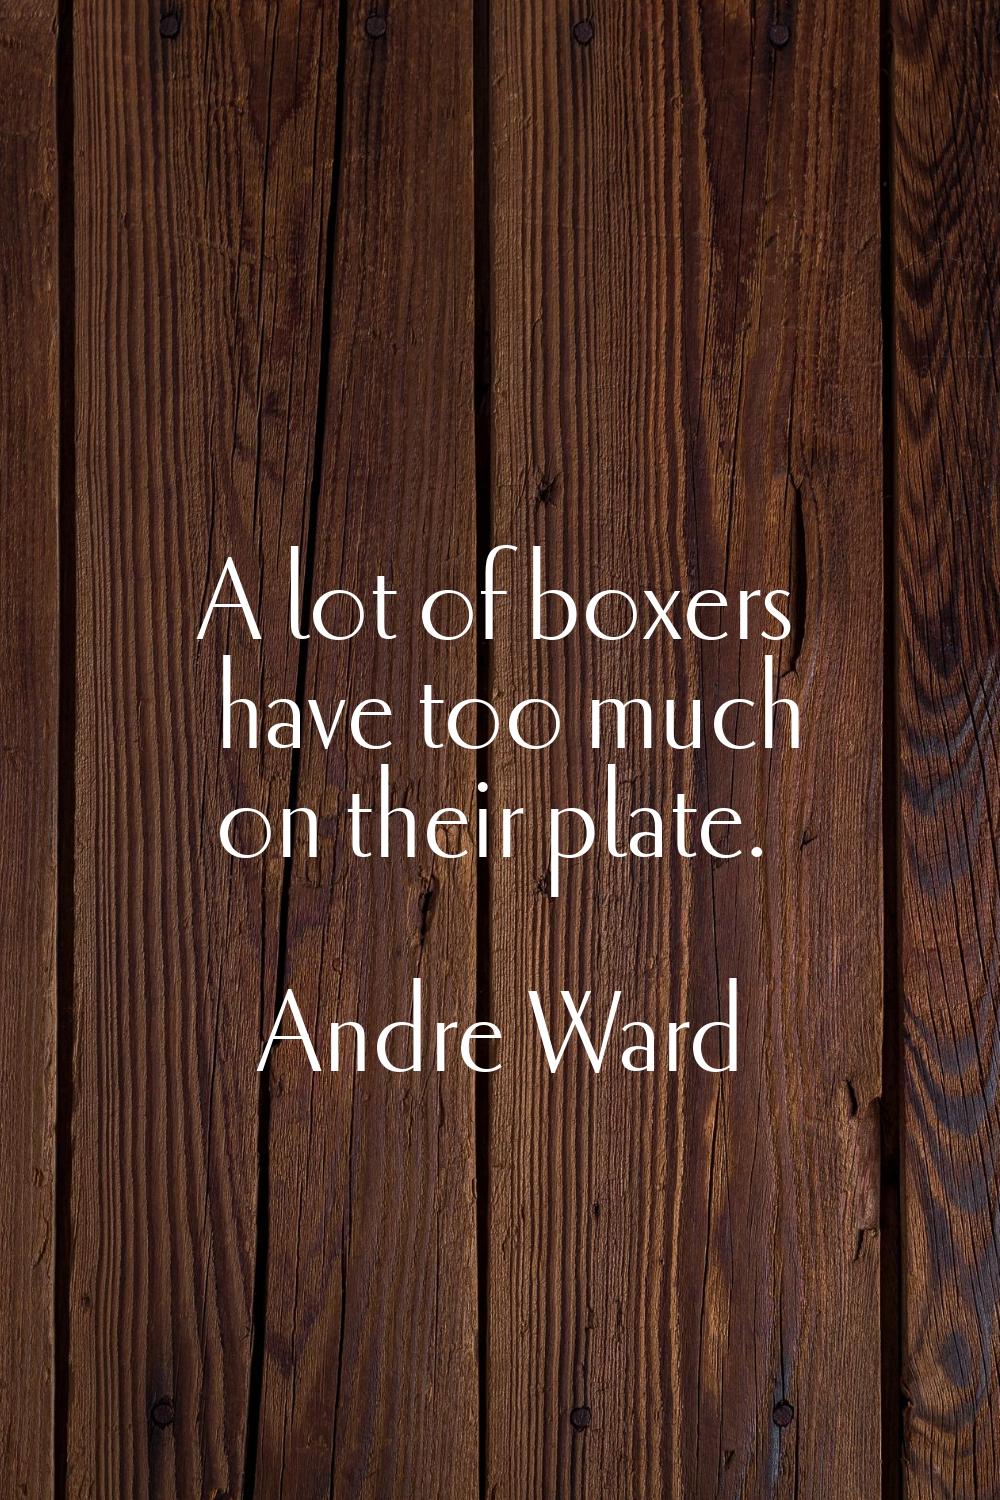 A lot of boxers have too much on their plate.